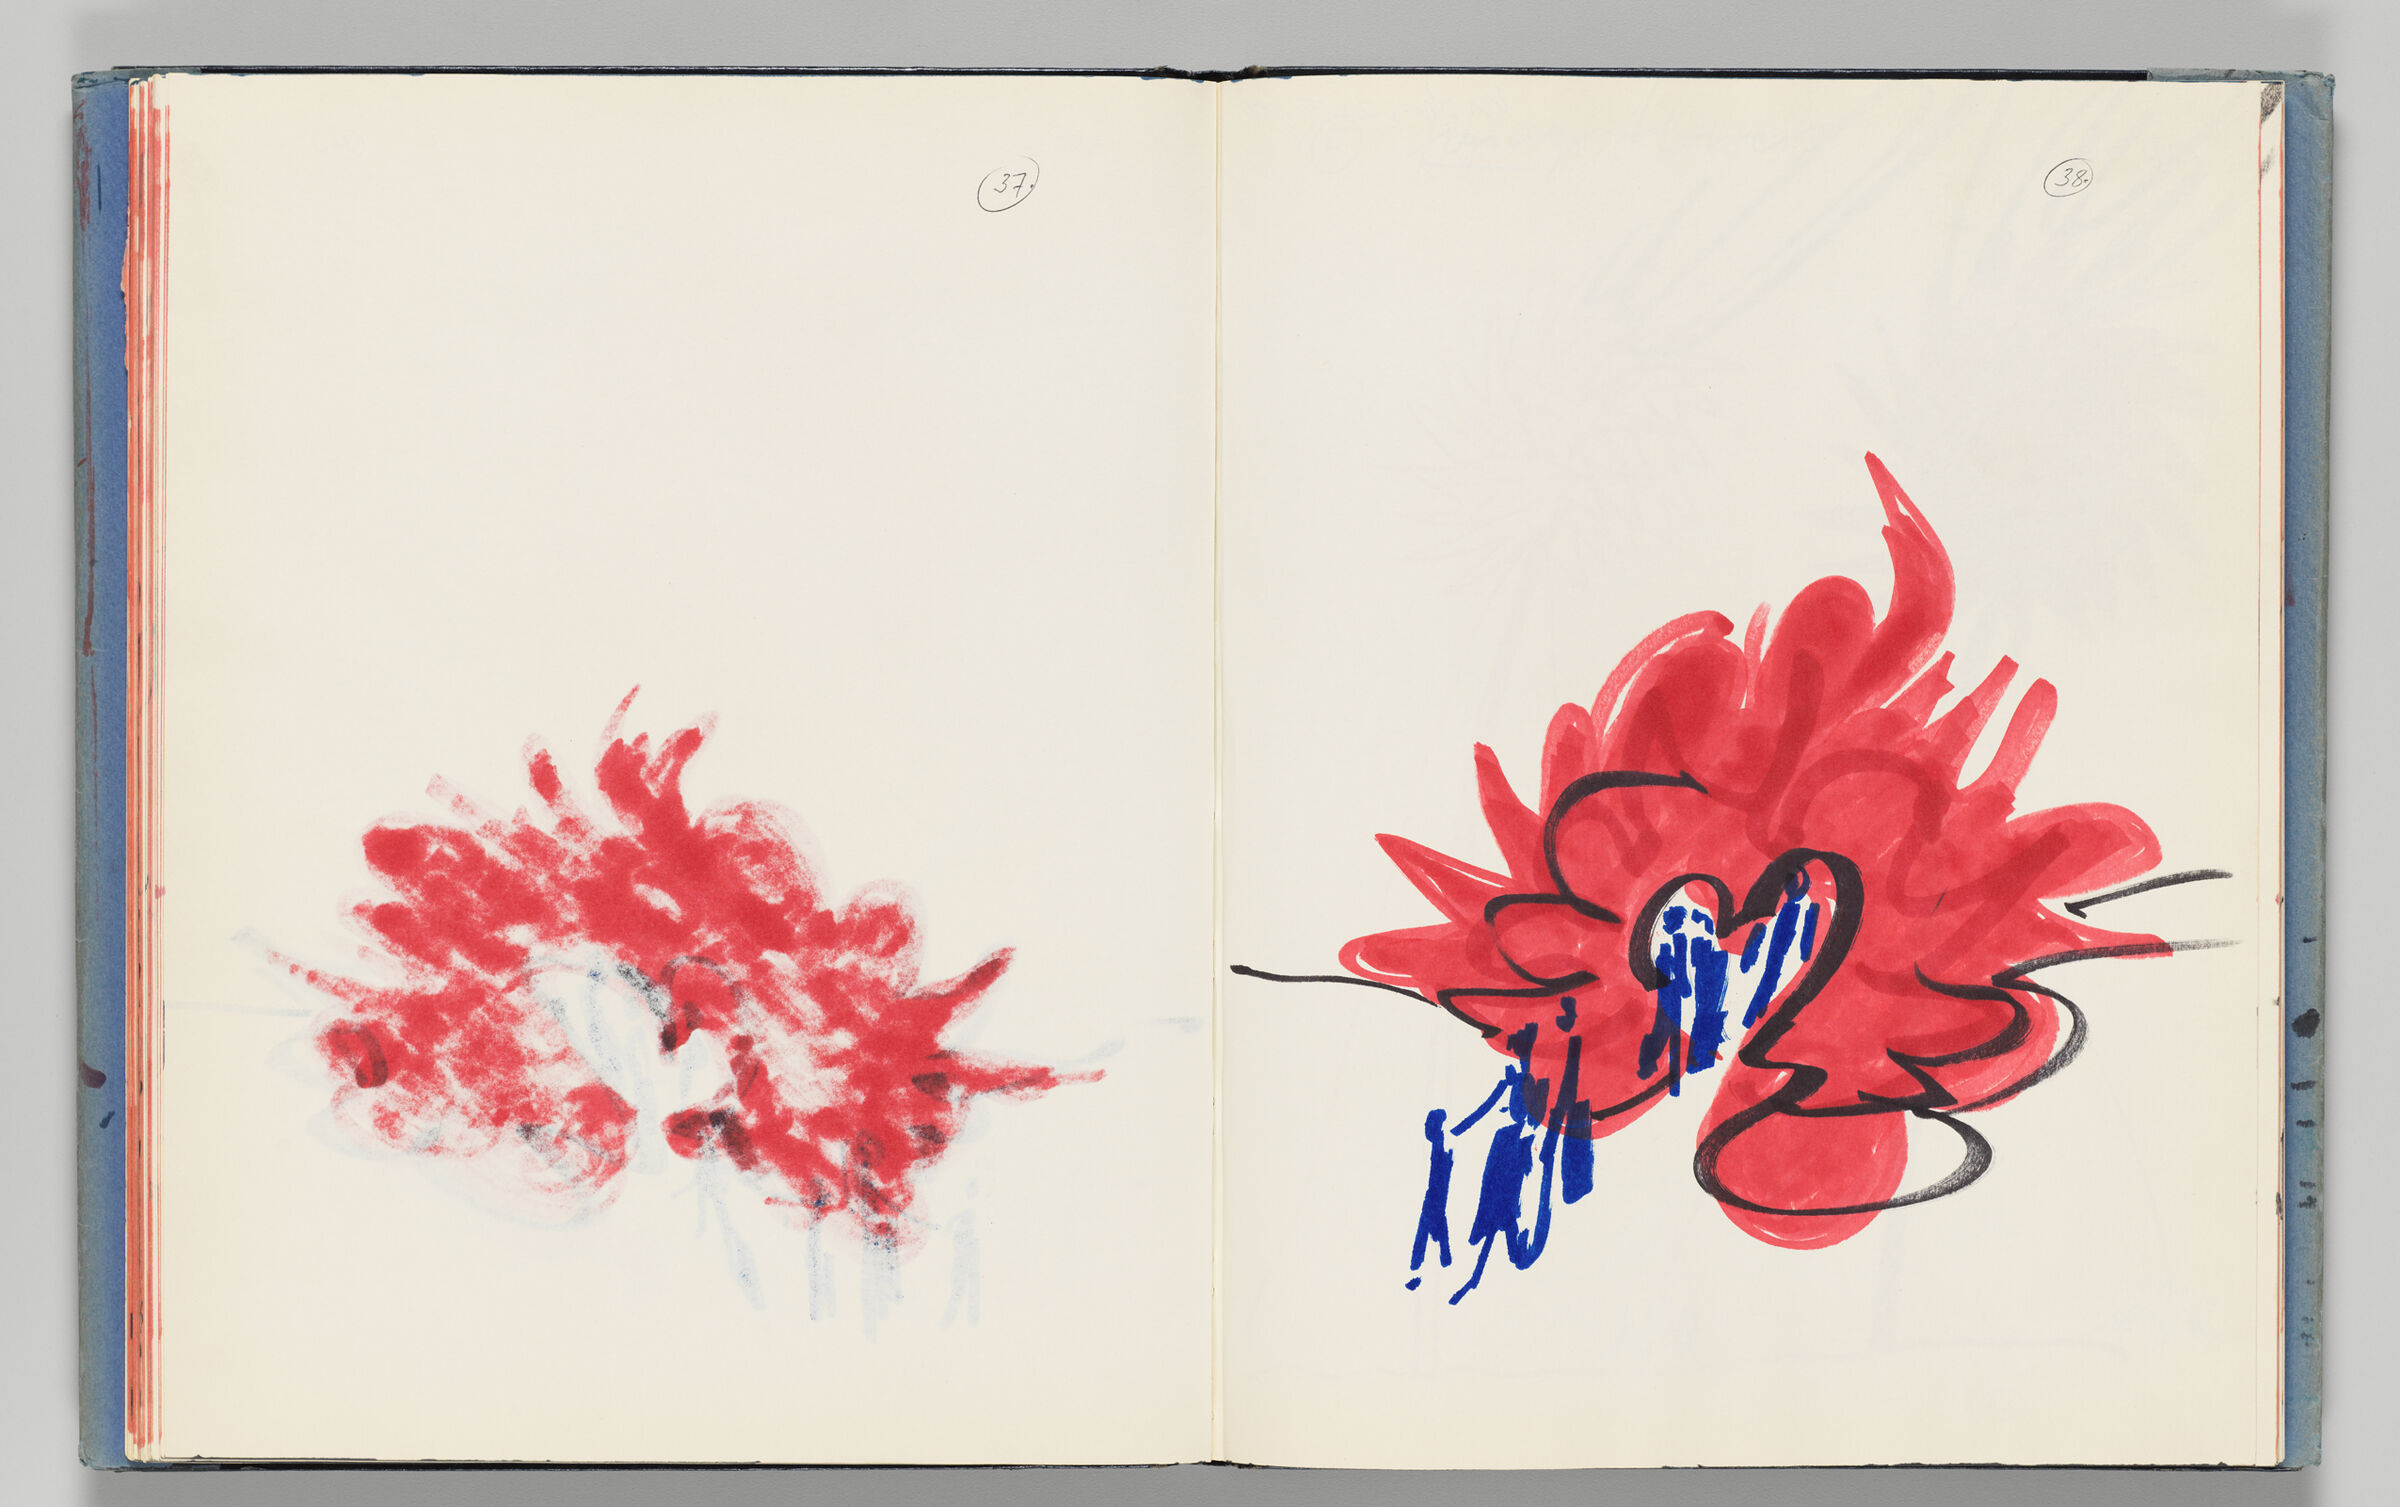 Untitled (Bleed-Through Of Previous Page With Page Number, Left Page); Untitled (Design For Flower House, Right Page)